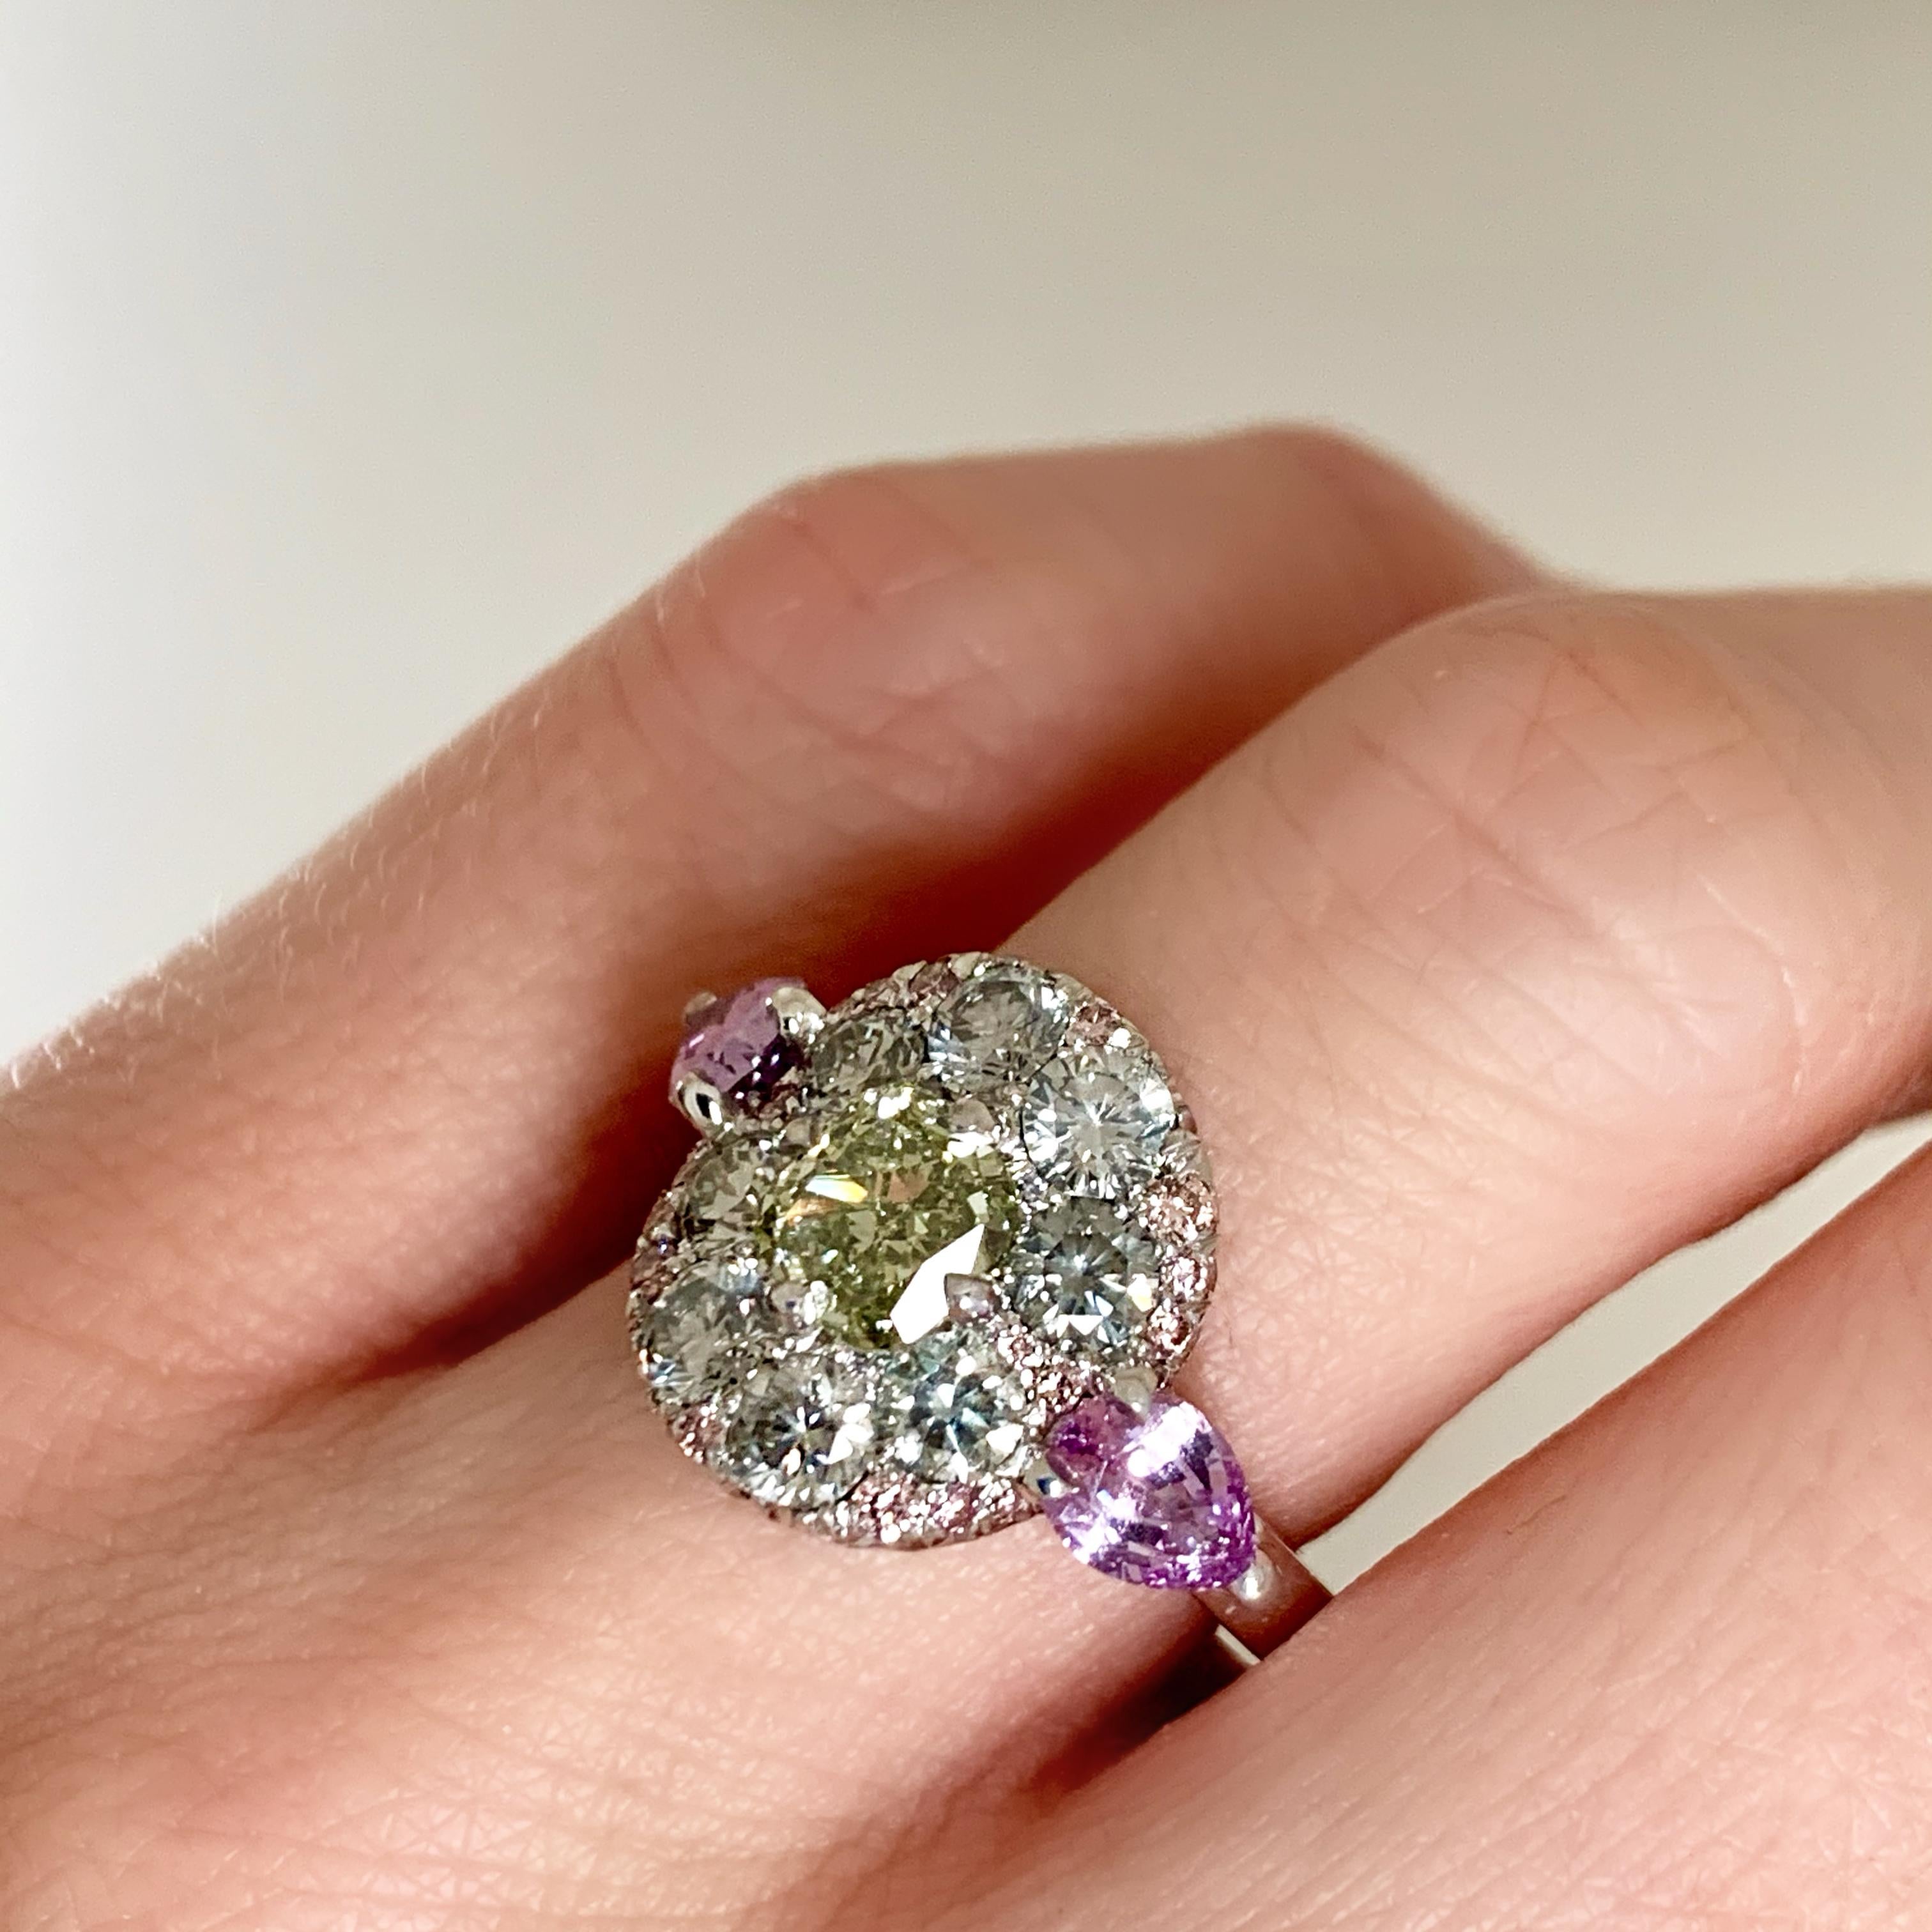 1.02 Carat Fancy Green, Grey, Pink Diamond, Unheated Violet Sapphire Pave Ring 6